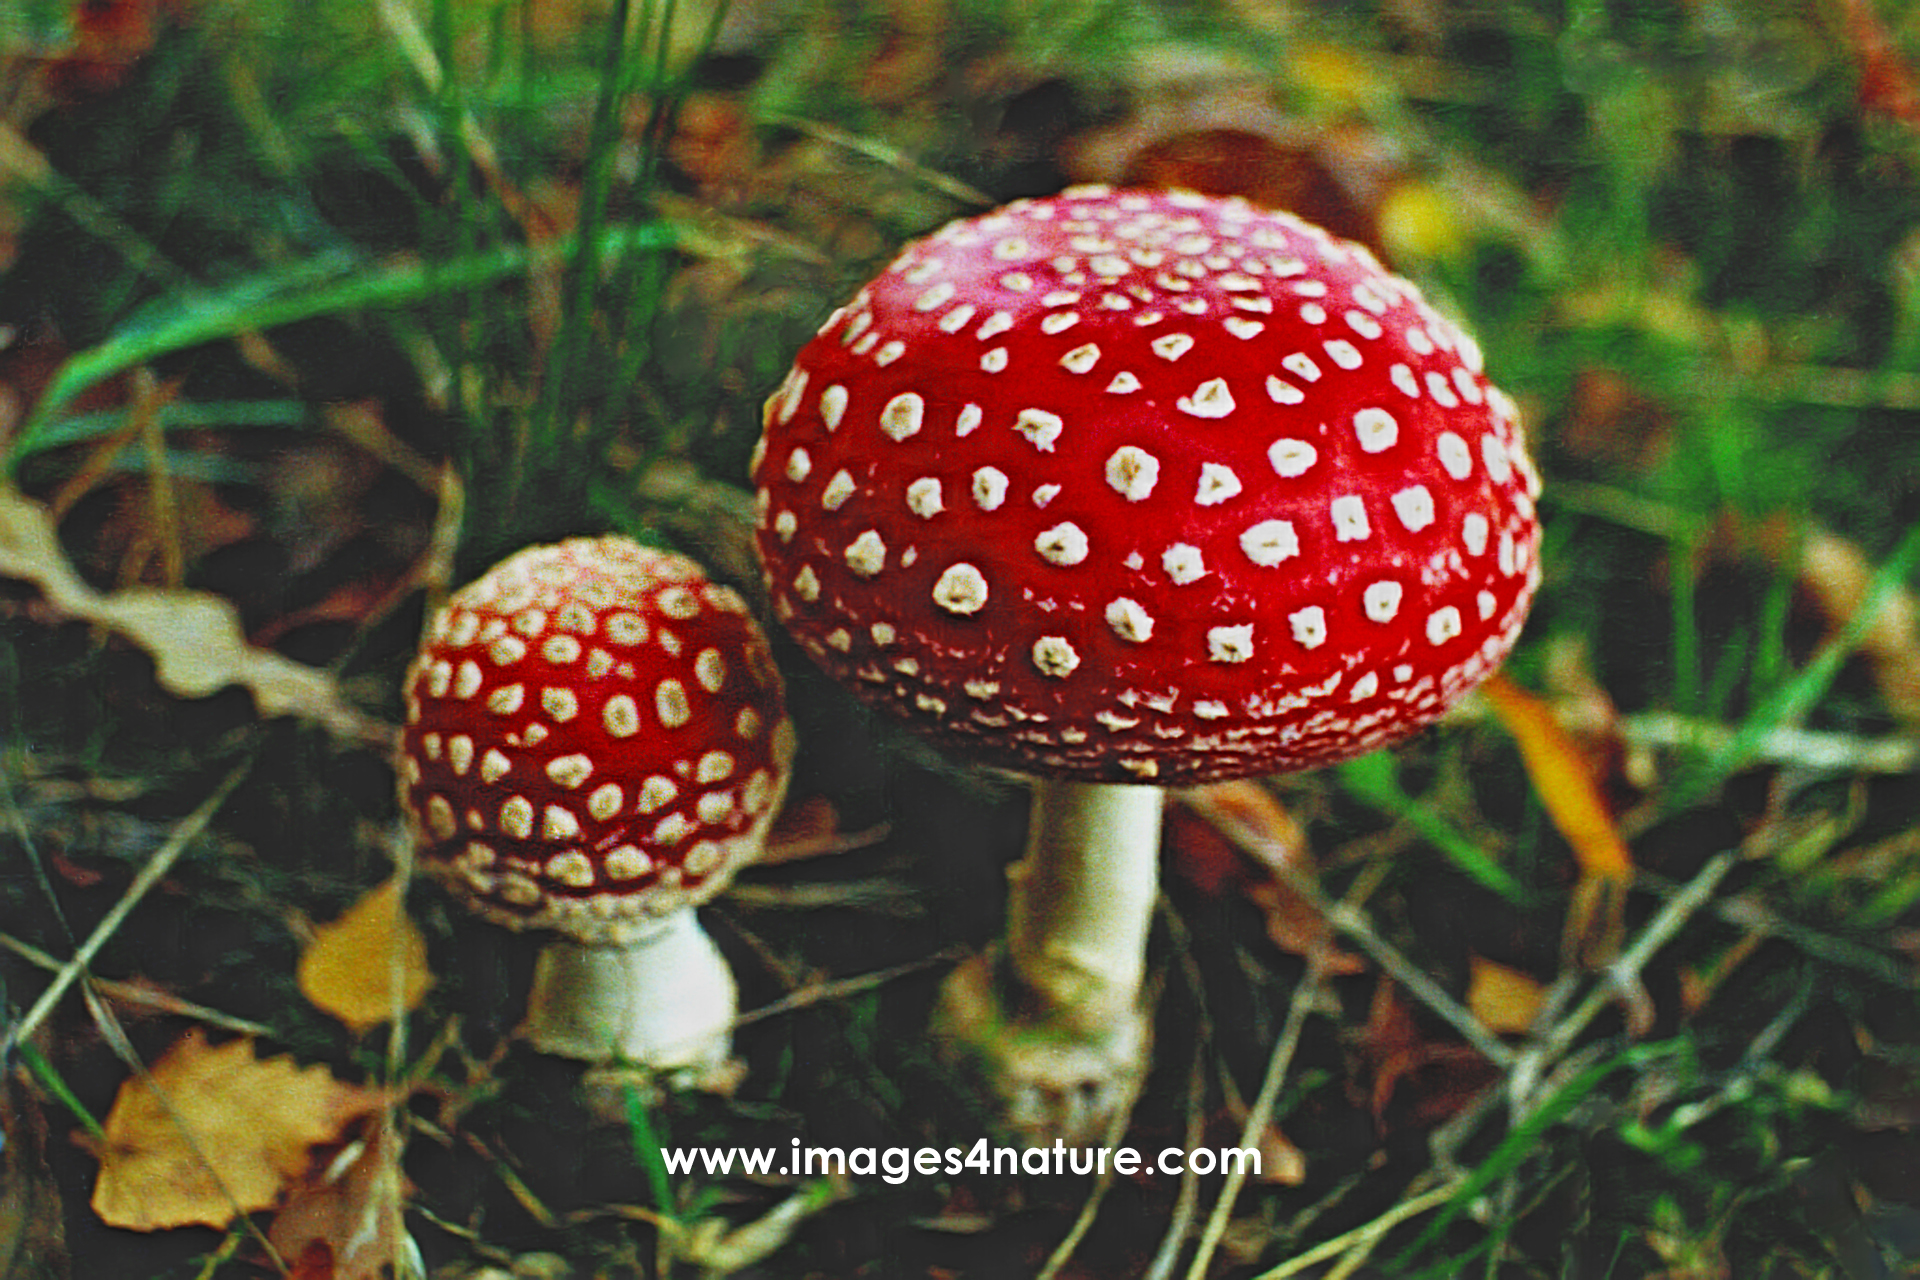 One large and one small fly agaric mushroom on grass